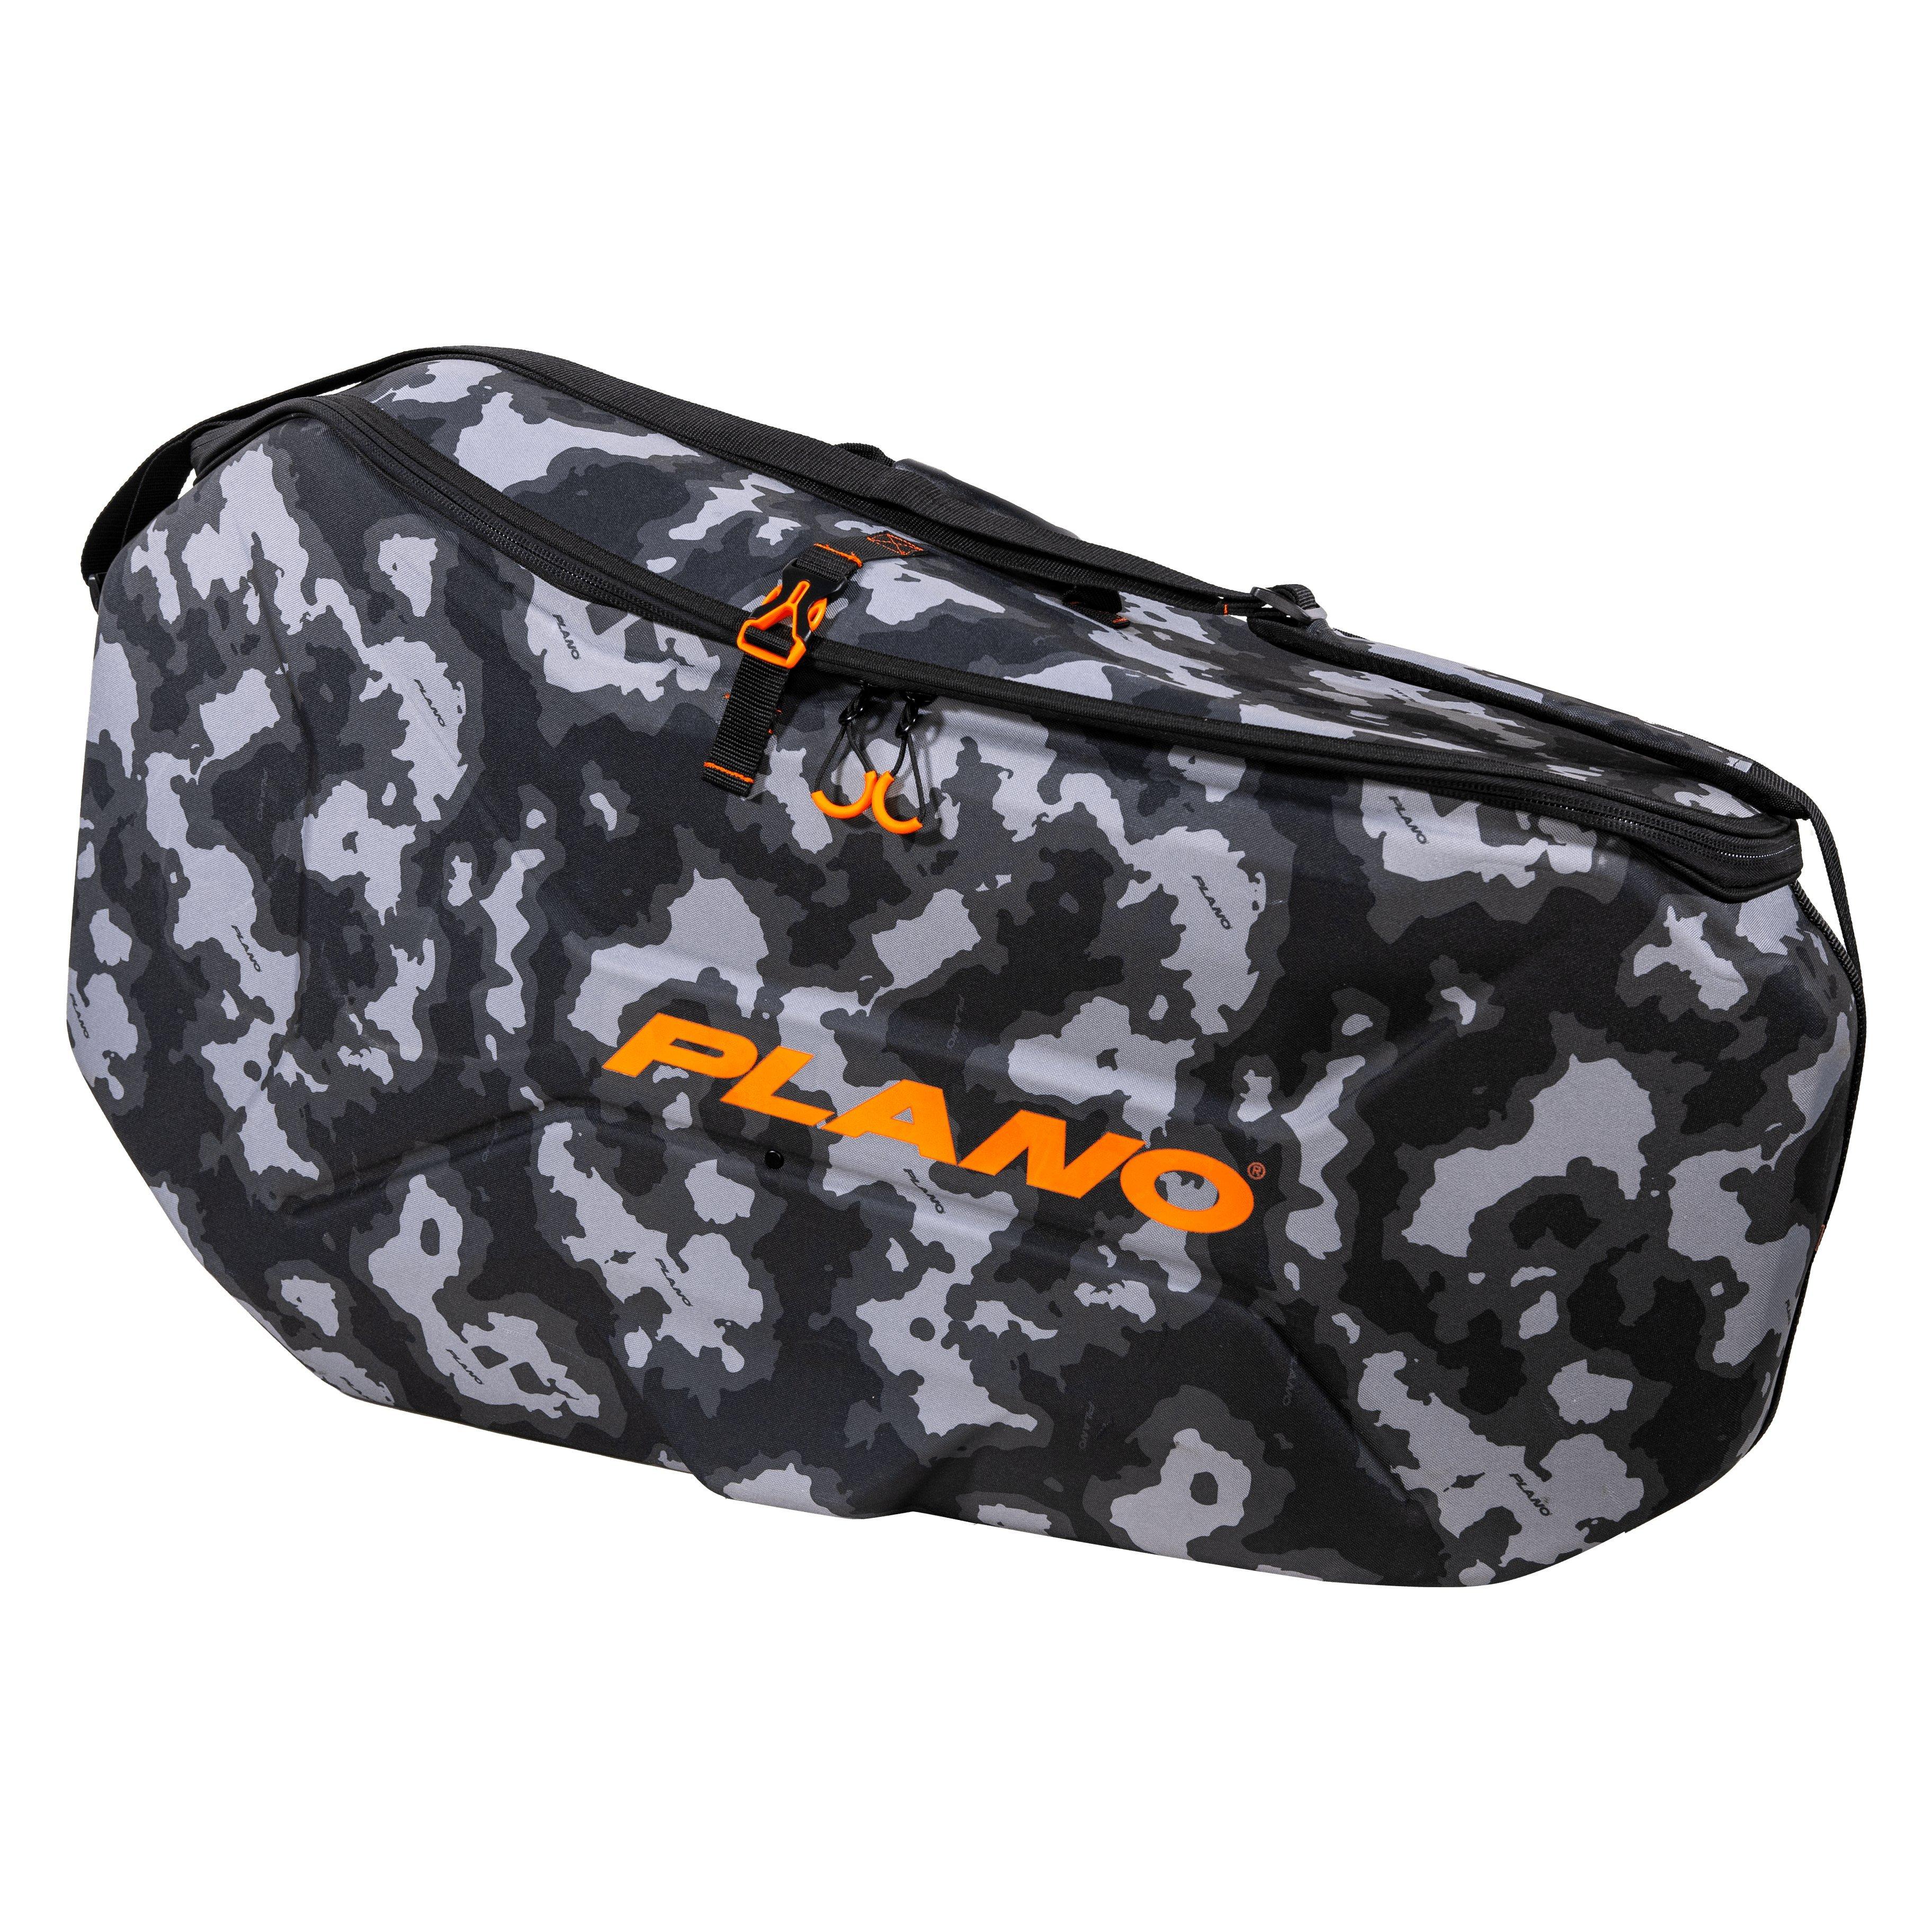 Details about   NEW PLANO 1108 ULTRA-LITE YOUTH BOW CASE BLACK 